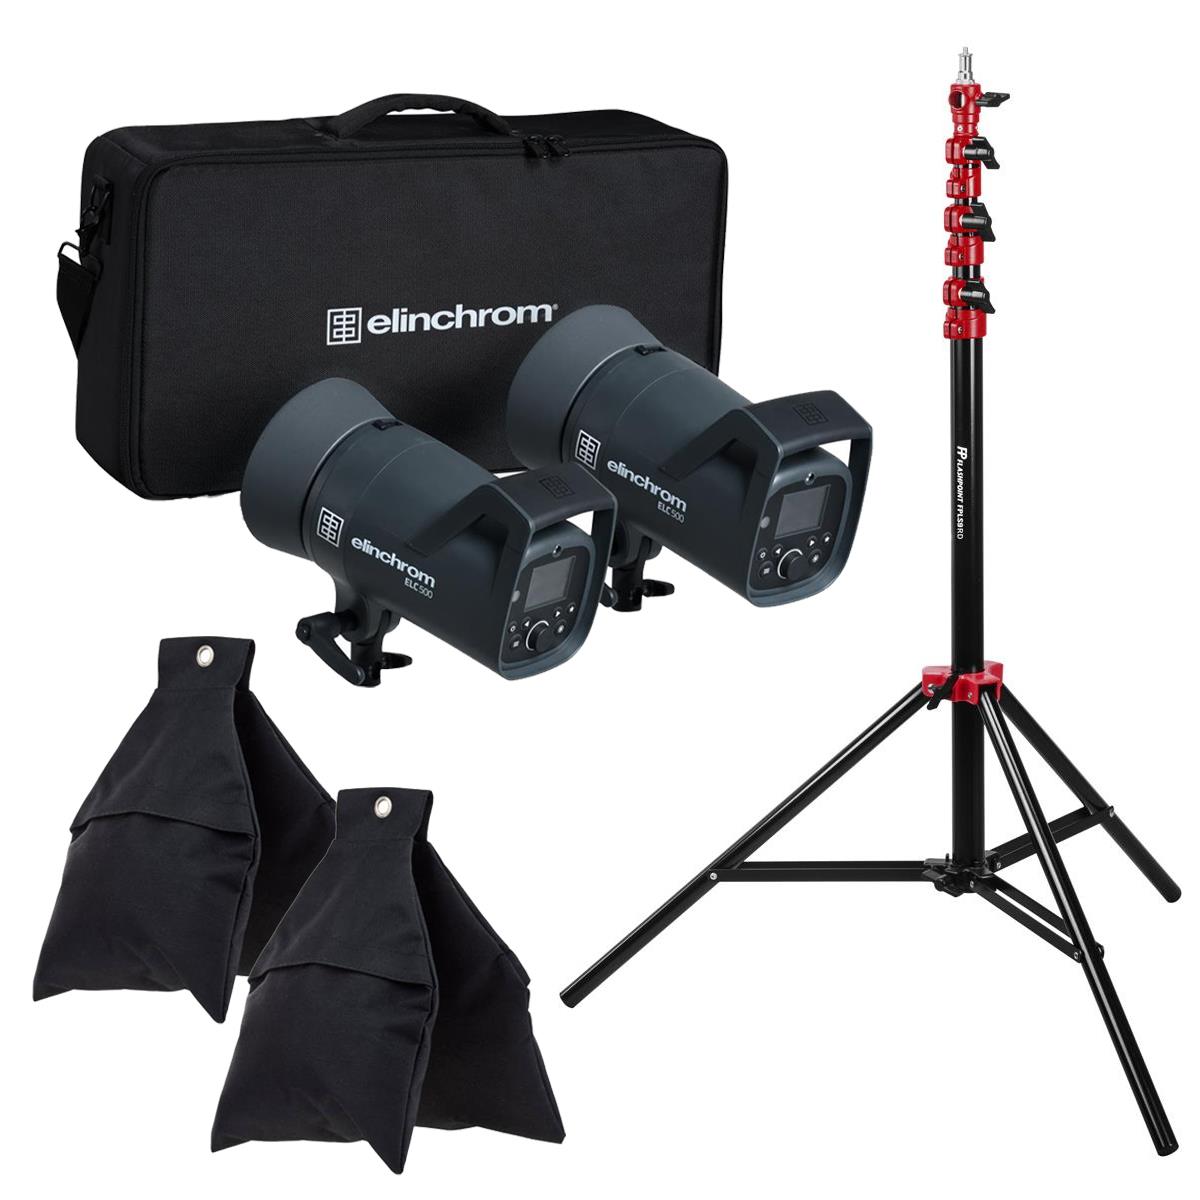 Image of Elinchrom ELC 500/500 Studio Monolight Dual Kit with 9.5' Stand and 2x Sand Bag